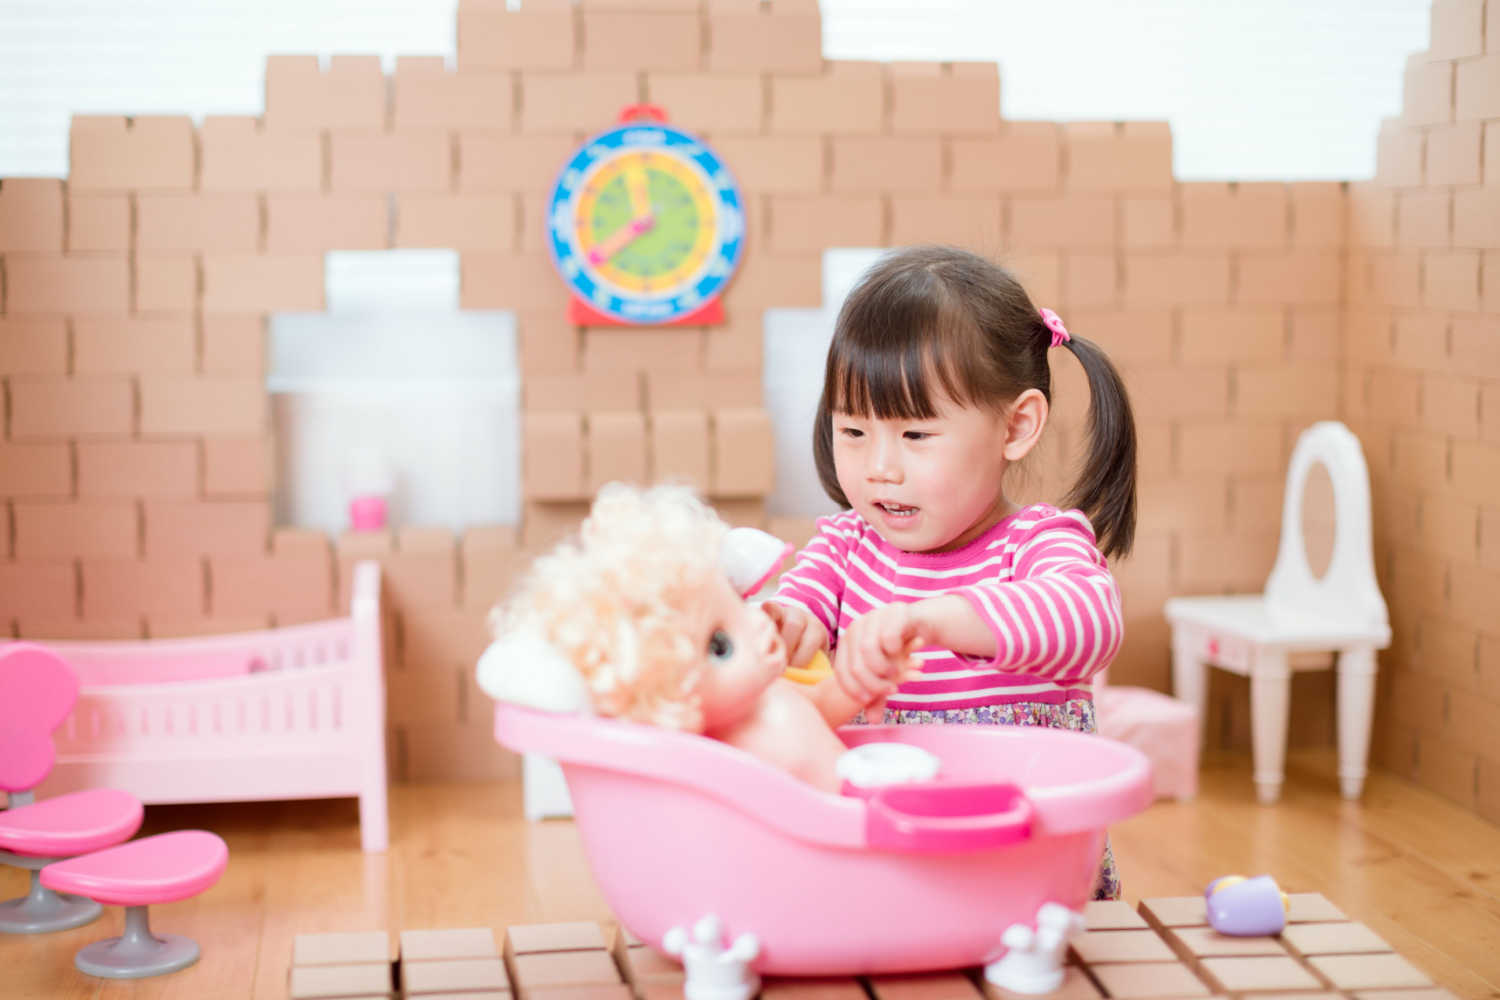 Benefits of pretend play in toddlers